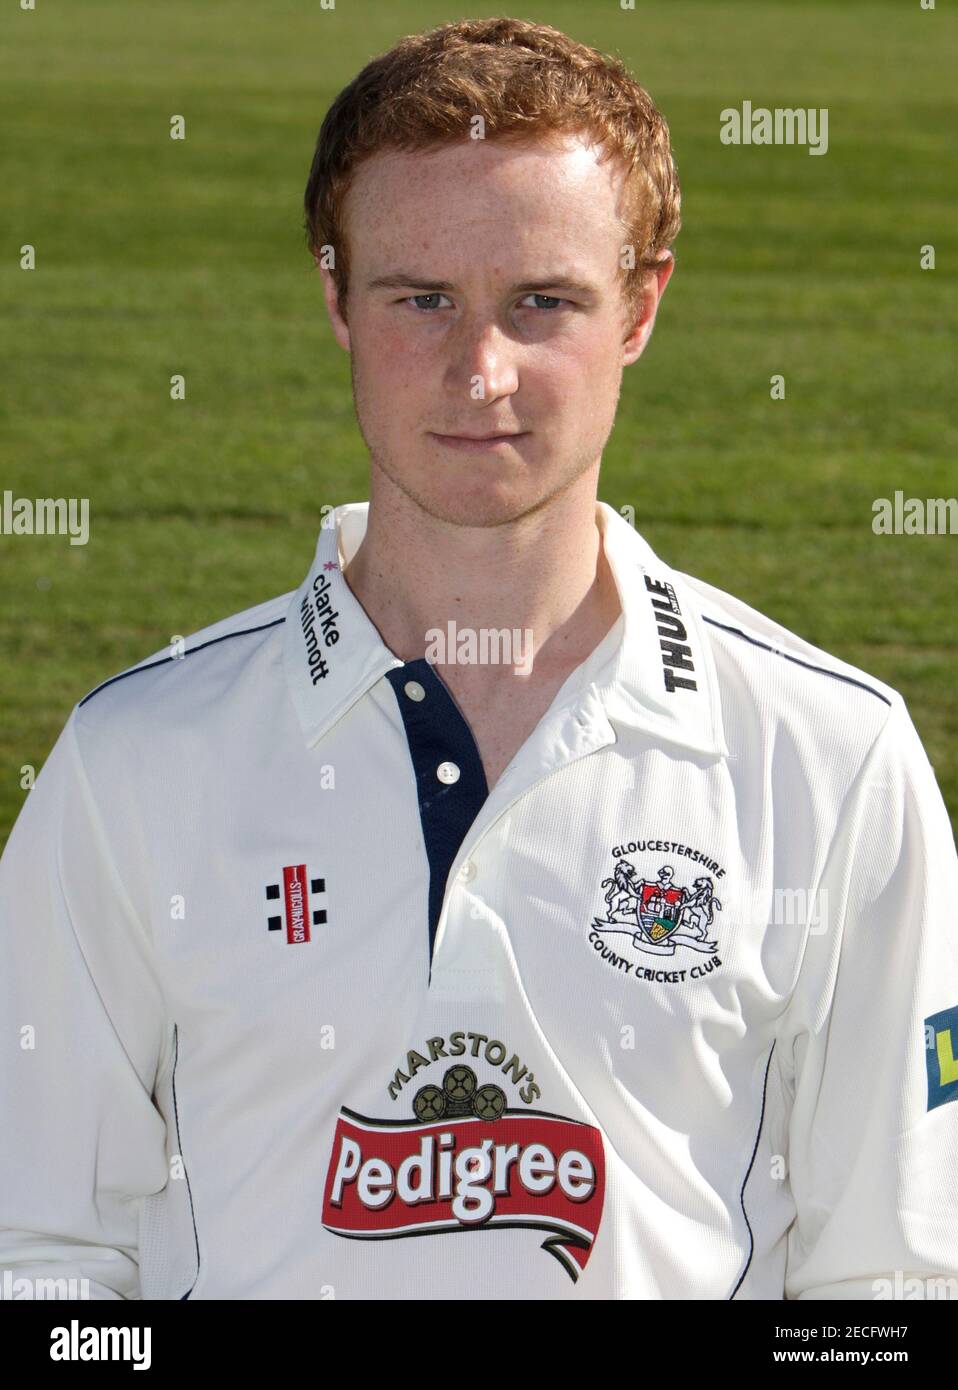 Cricket - Gloucestershire CCC Photocall 2010 - The County Ground, Bristol - 8/4/10  Ian Saxelby  Mandatory Credit: Action Images / Peter Cziborra Stock Photo